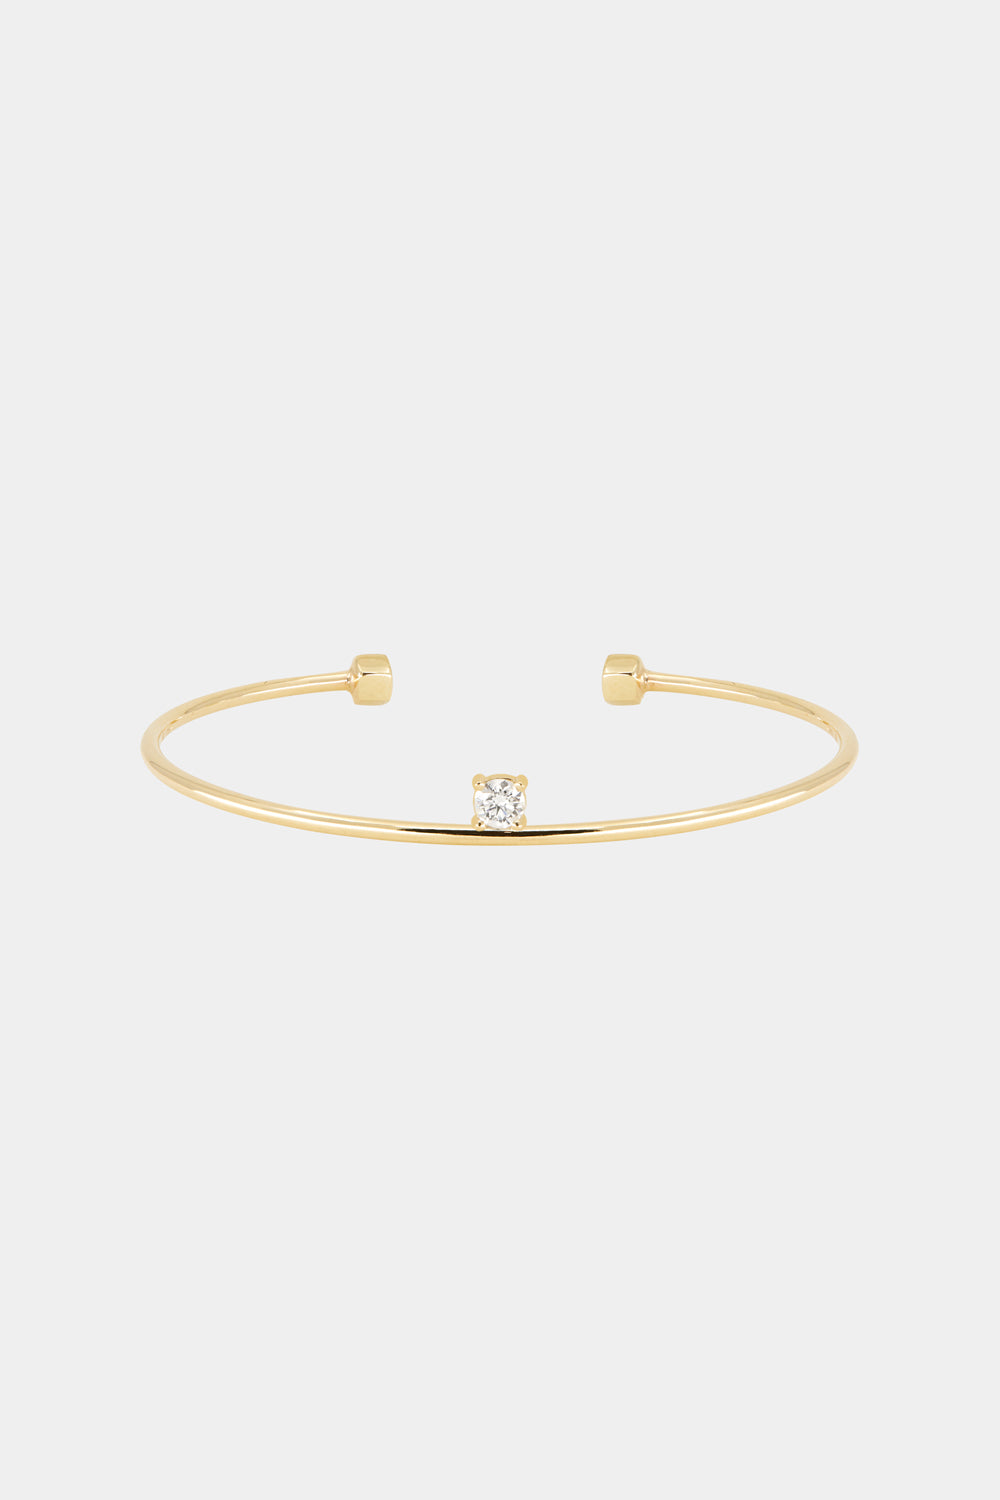 Jolie Cuff with Floating Diamond | 9K Yellow Gold